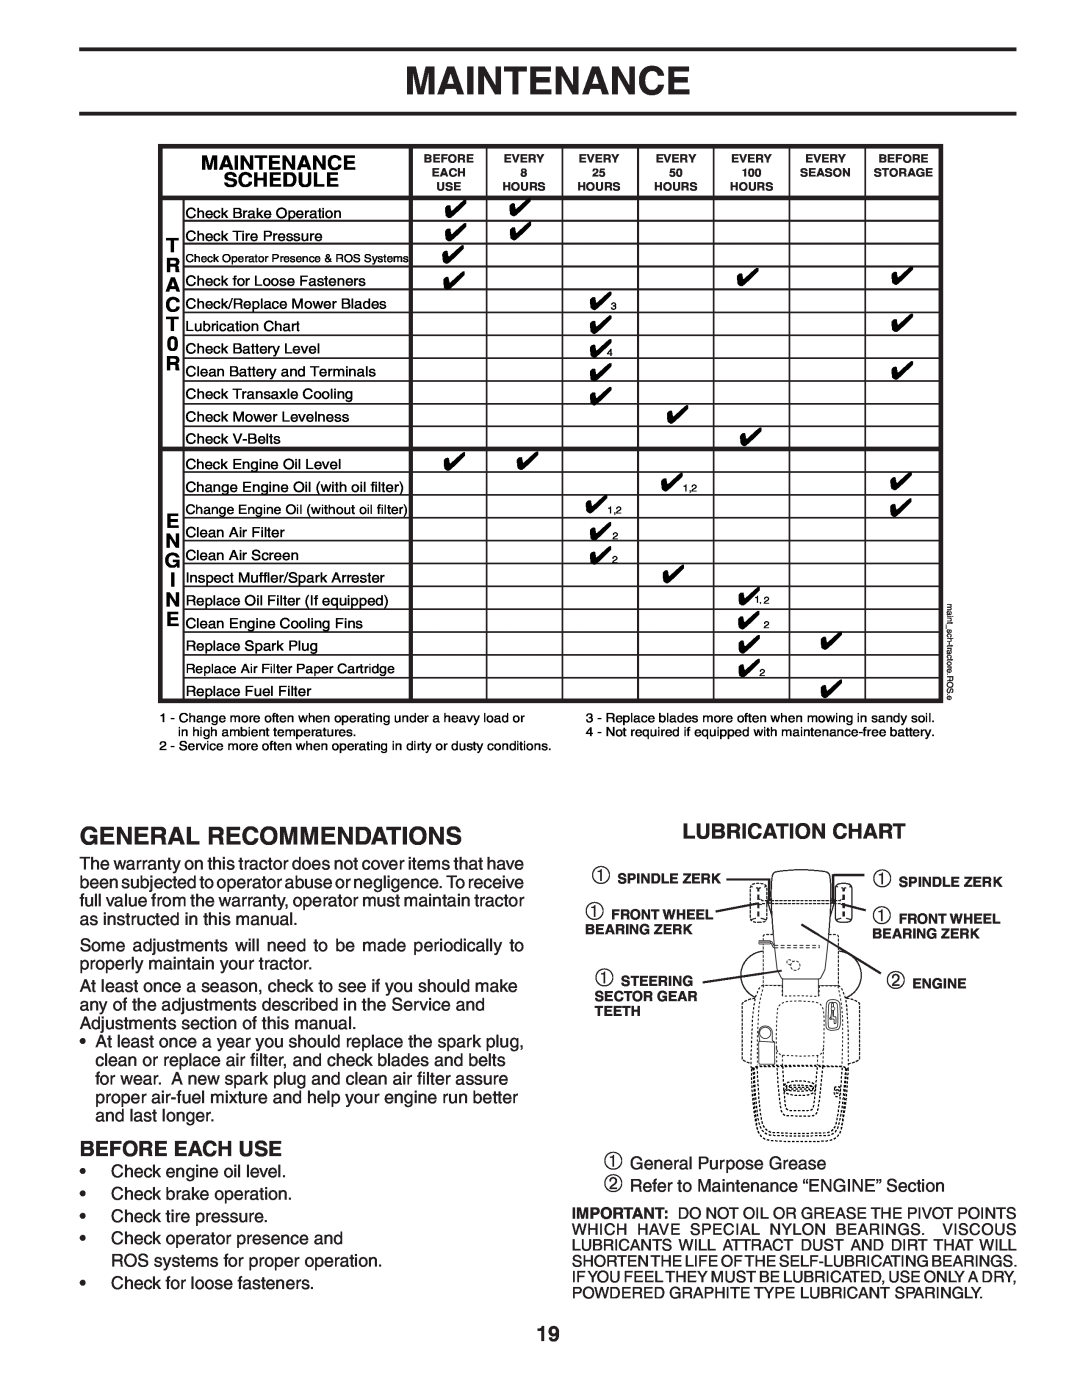 Husqvarna CTH2542 XP owner manual Maintenance, General Recommendations, Lubrication Chart, Before Each Use 